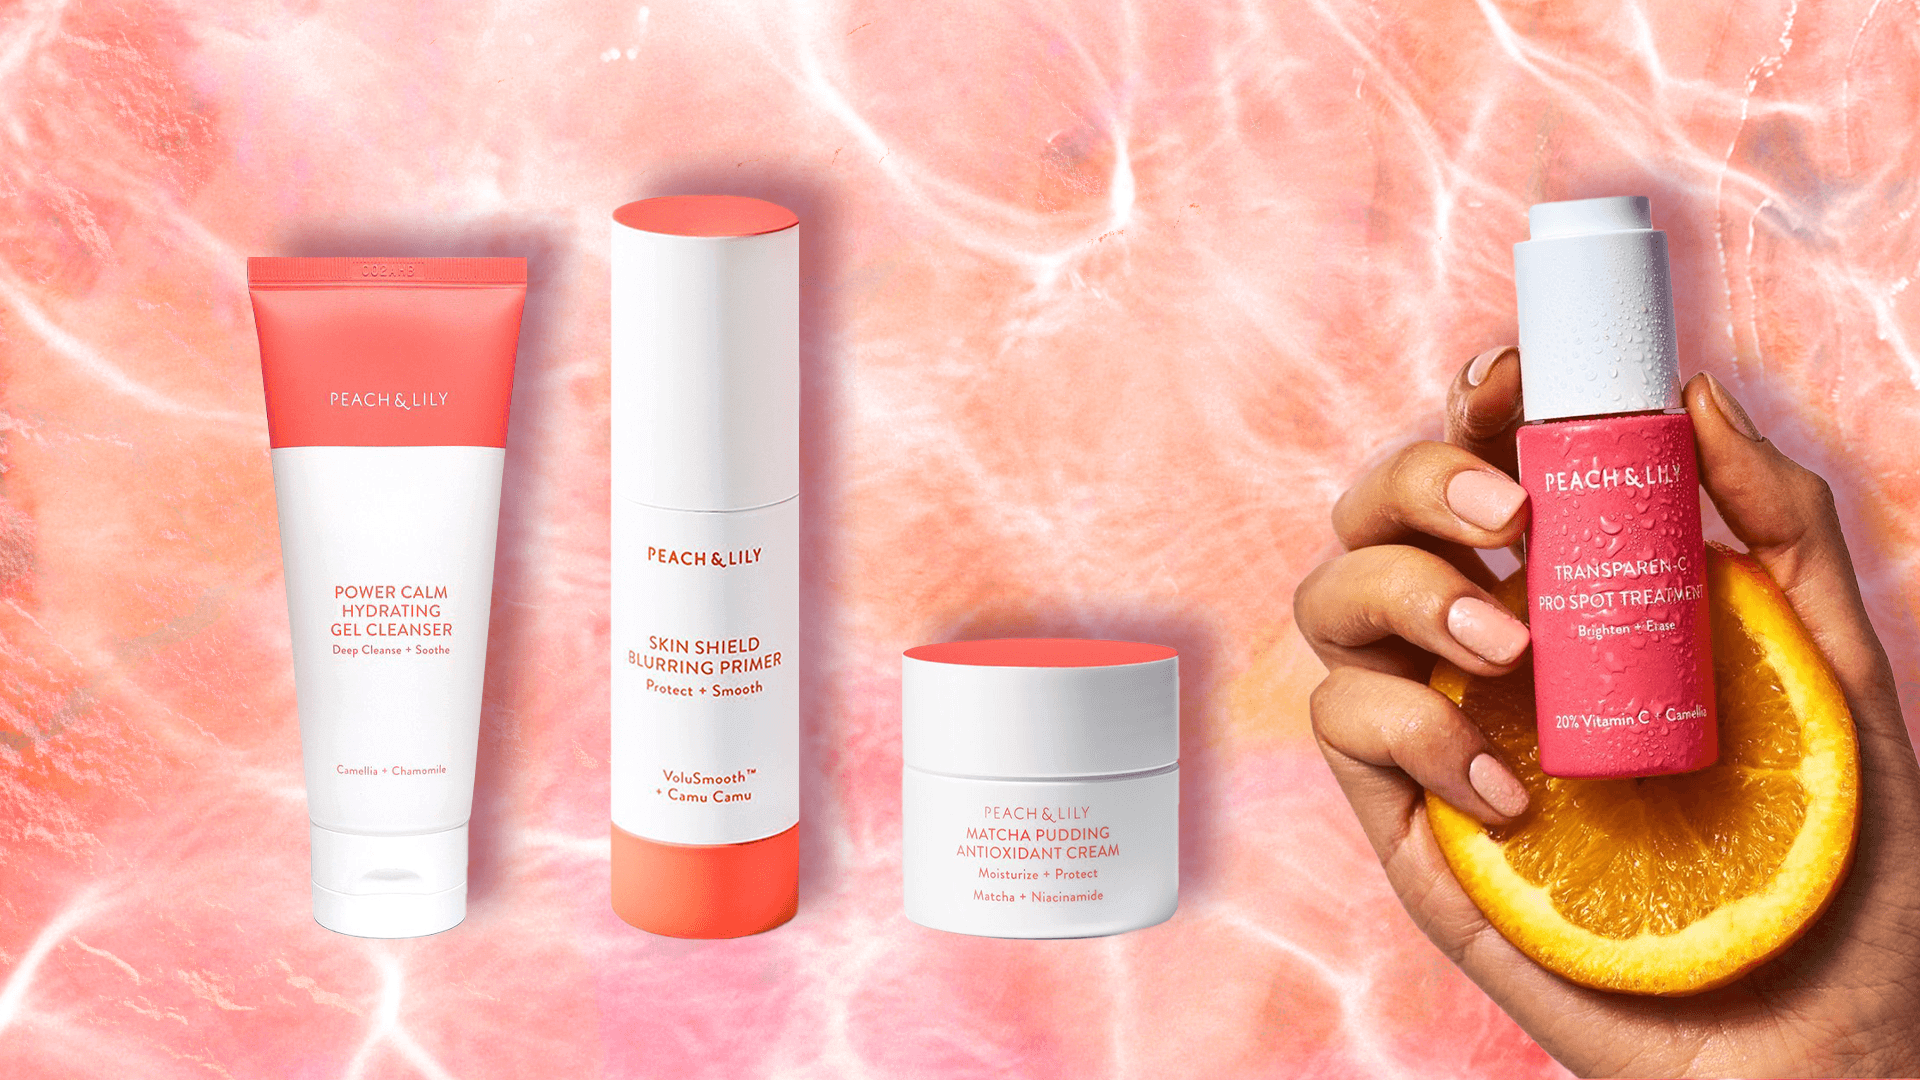 Get Brighter, Smoother Skin with These 10 Peach & Lily Products